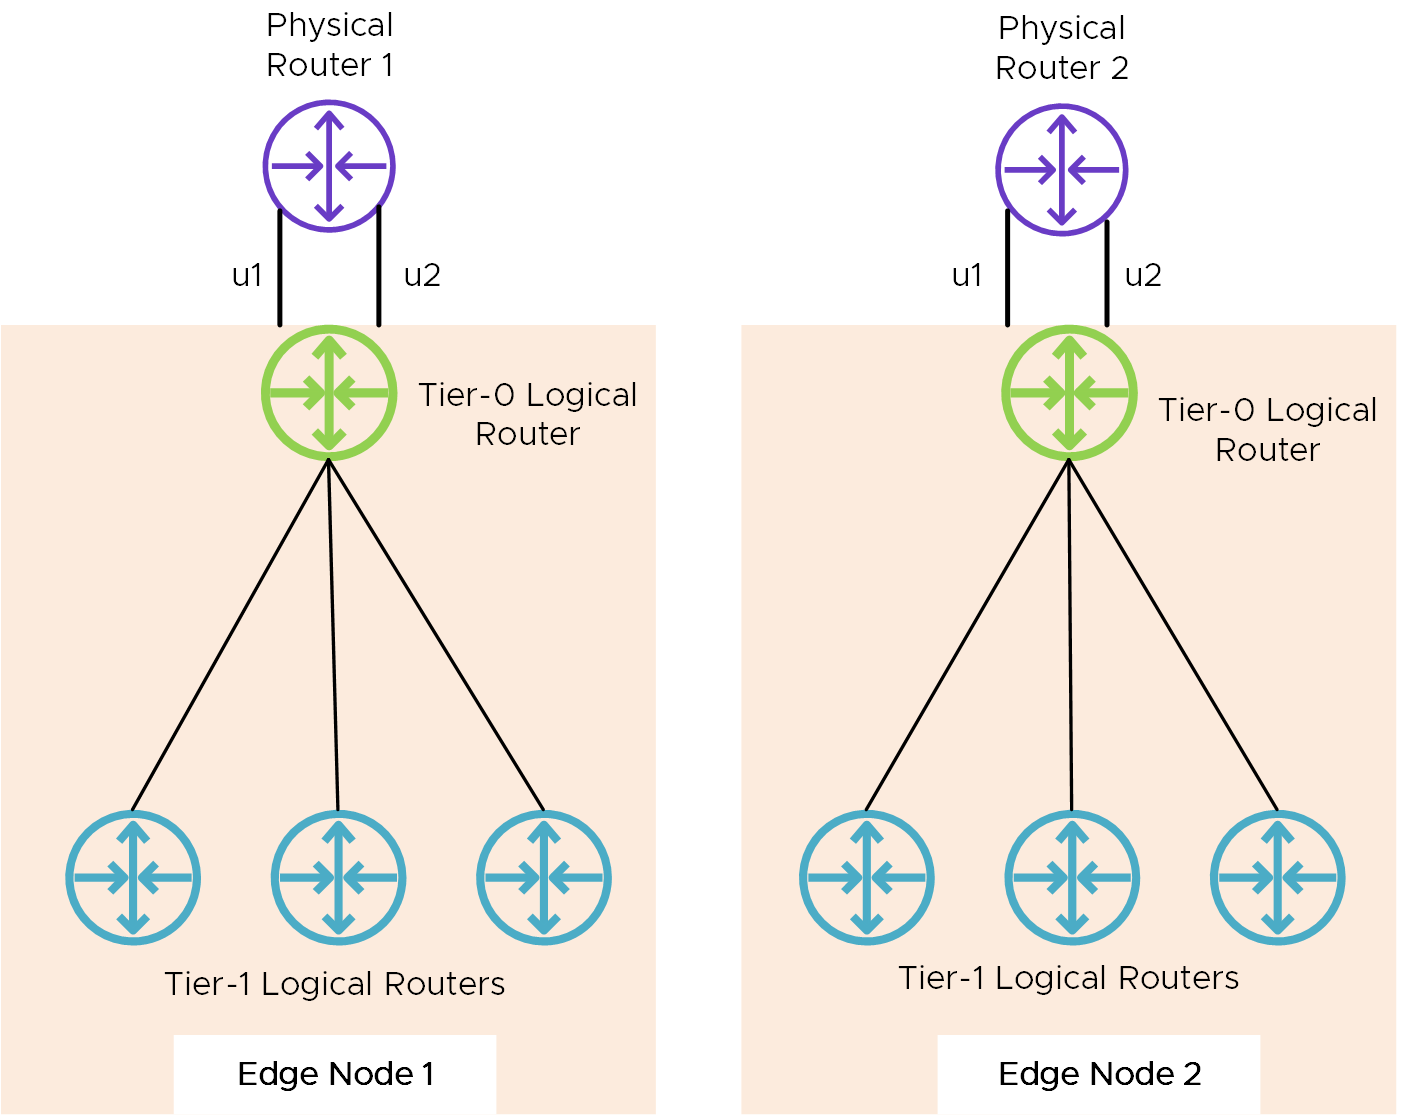 North Bound ECMP routing solution where T1 and T0 are same cluster as T0